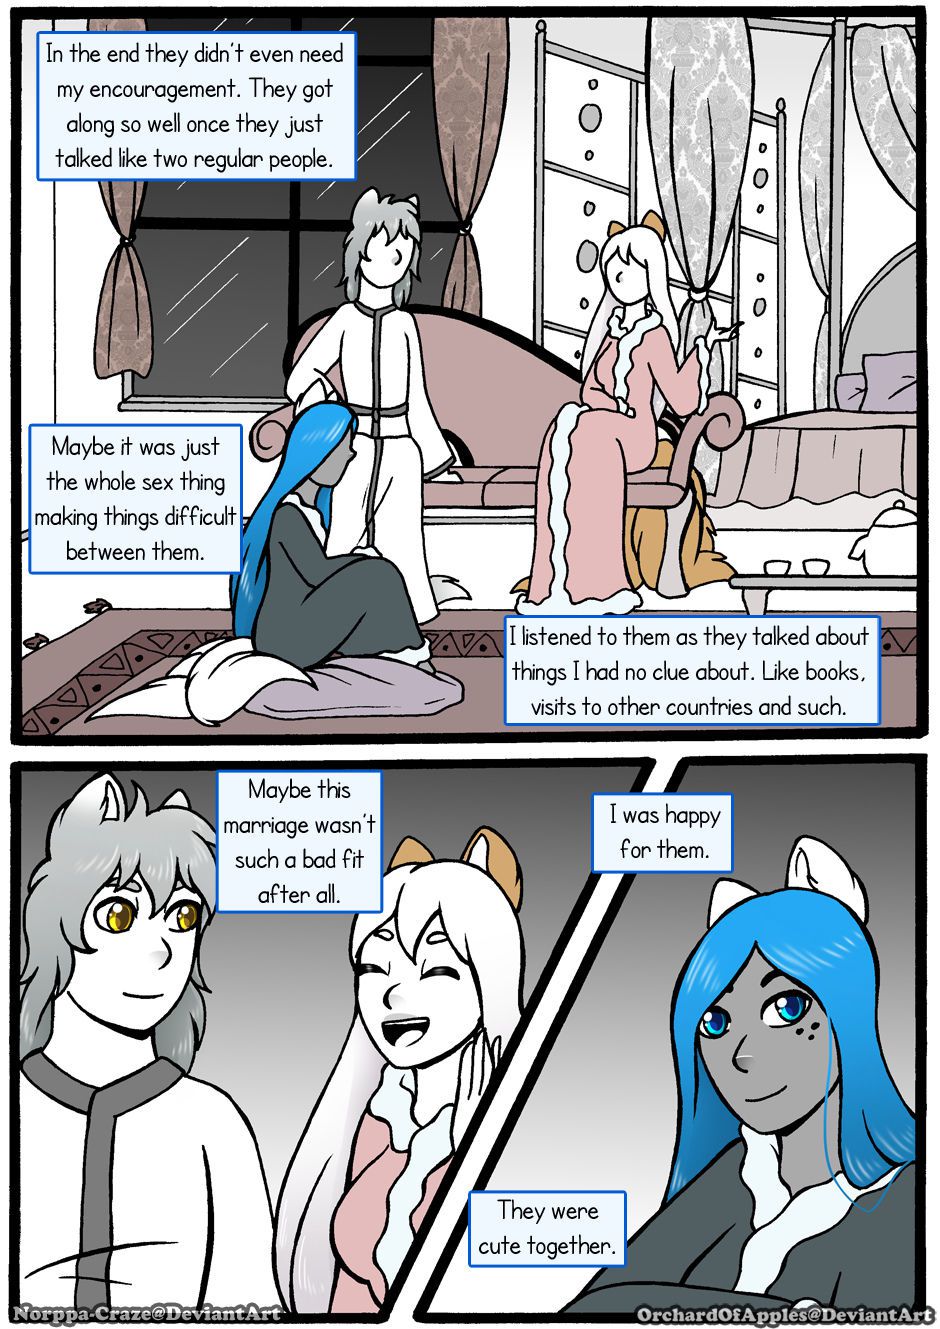 [Jeny-jen94] Between Kings and Queens [Ongoing] 271